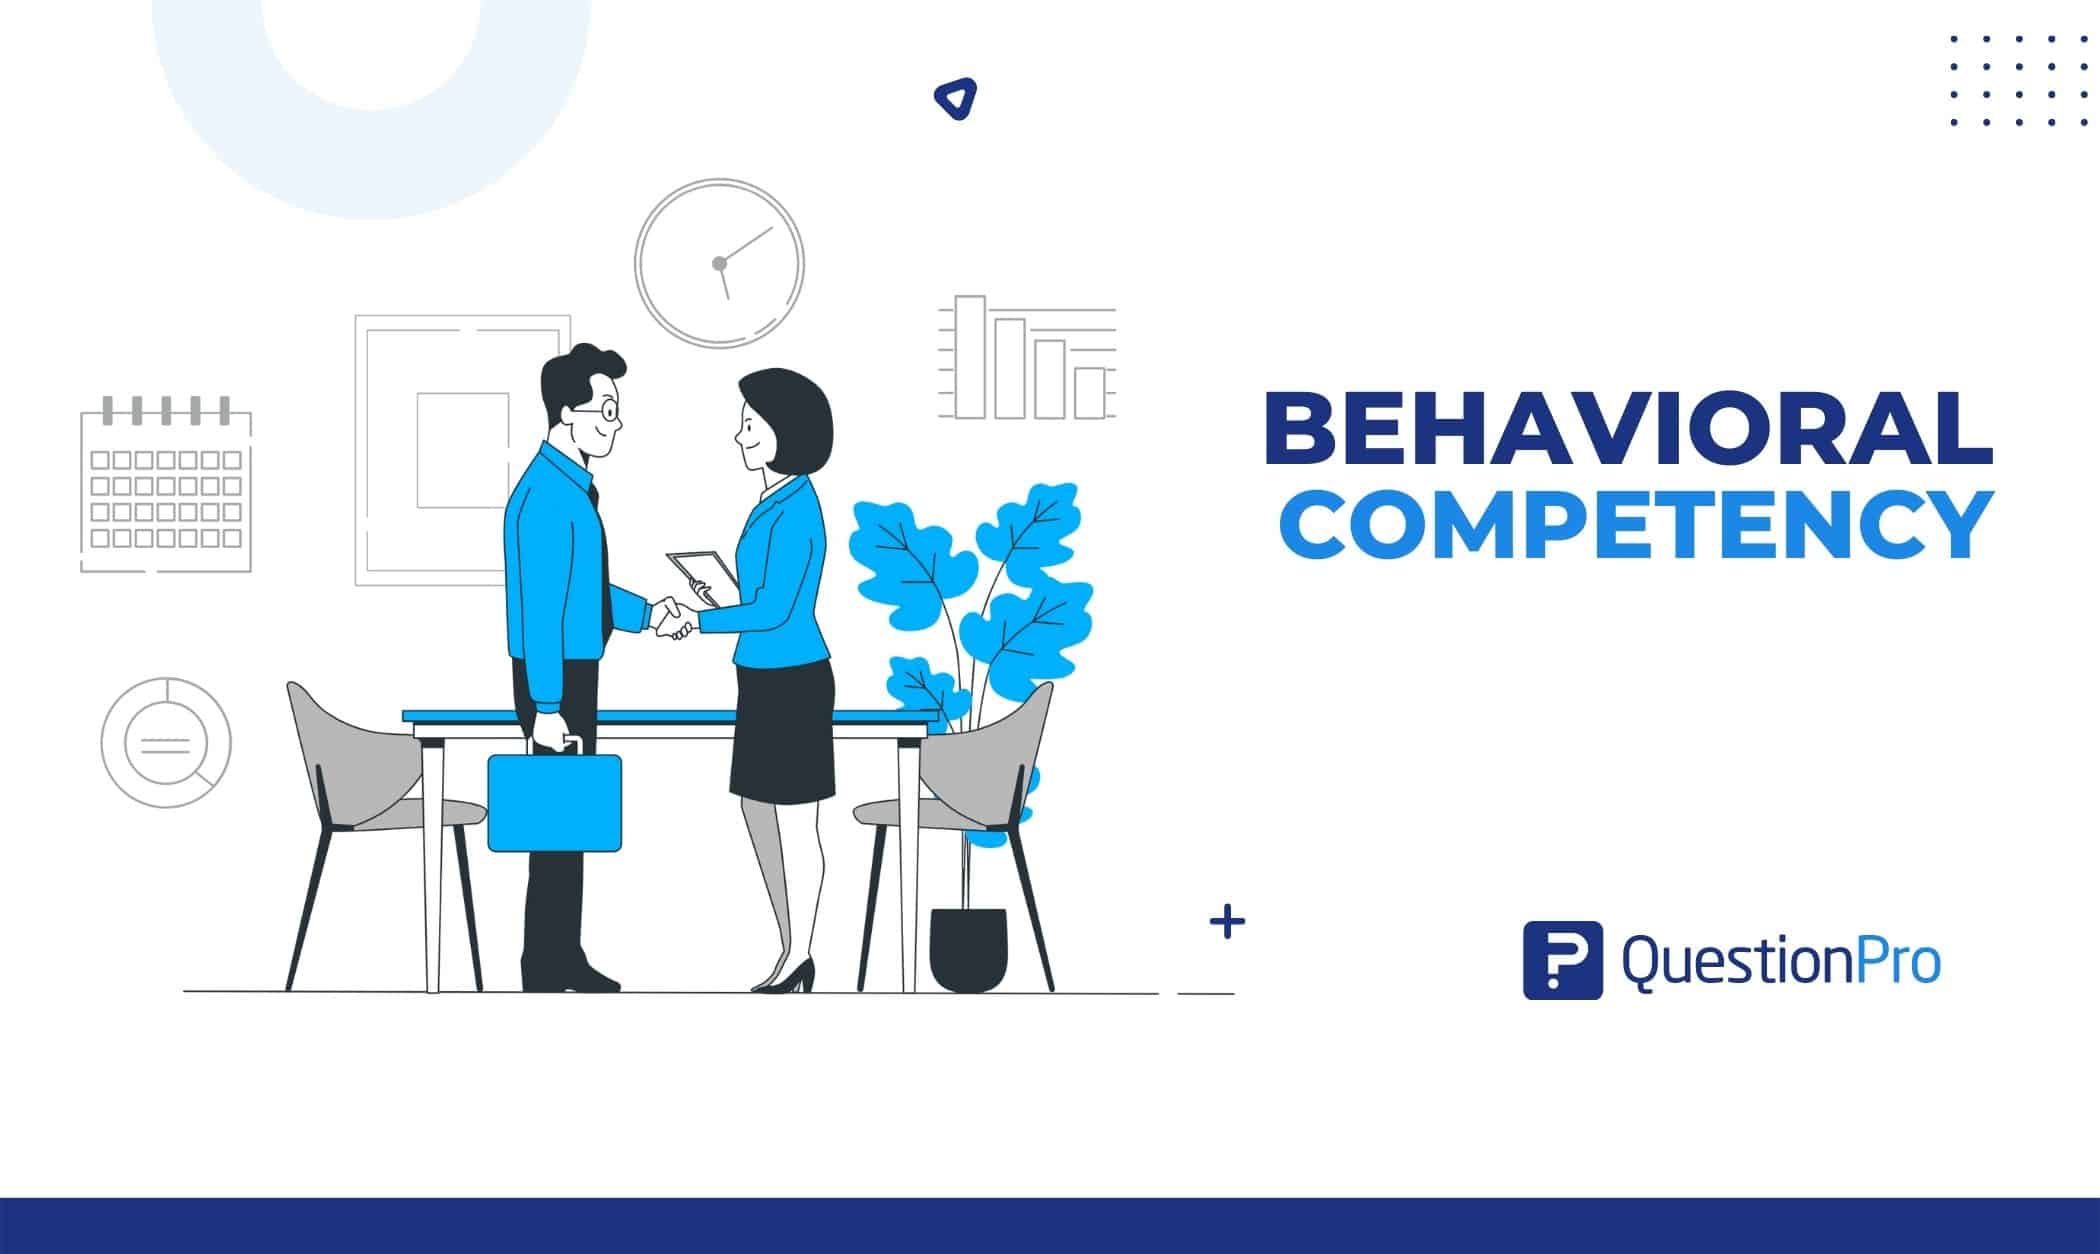 Behavioral competency allows us to make better decisions about talent, based on behaviors & soft skills that move an organization forward.